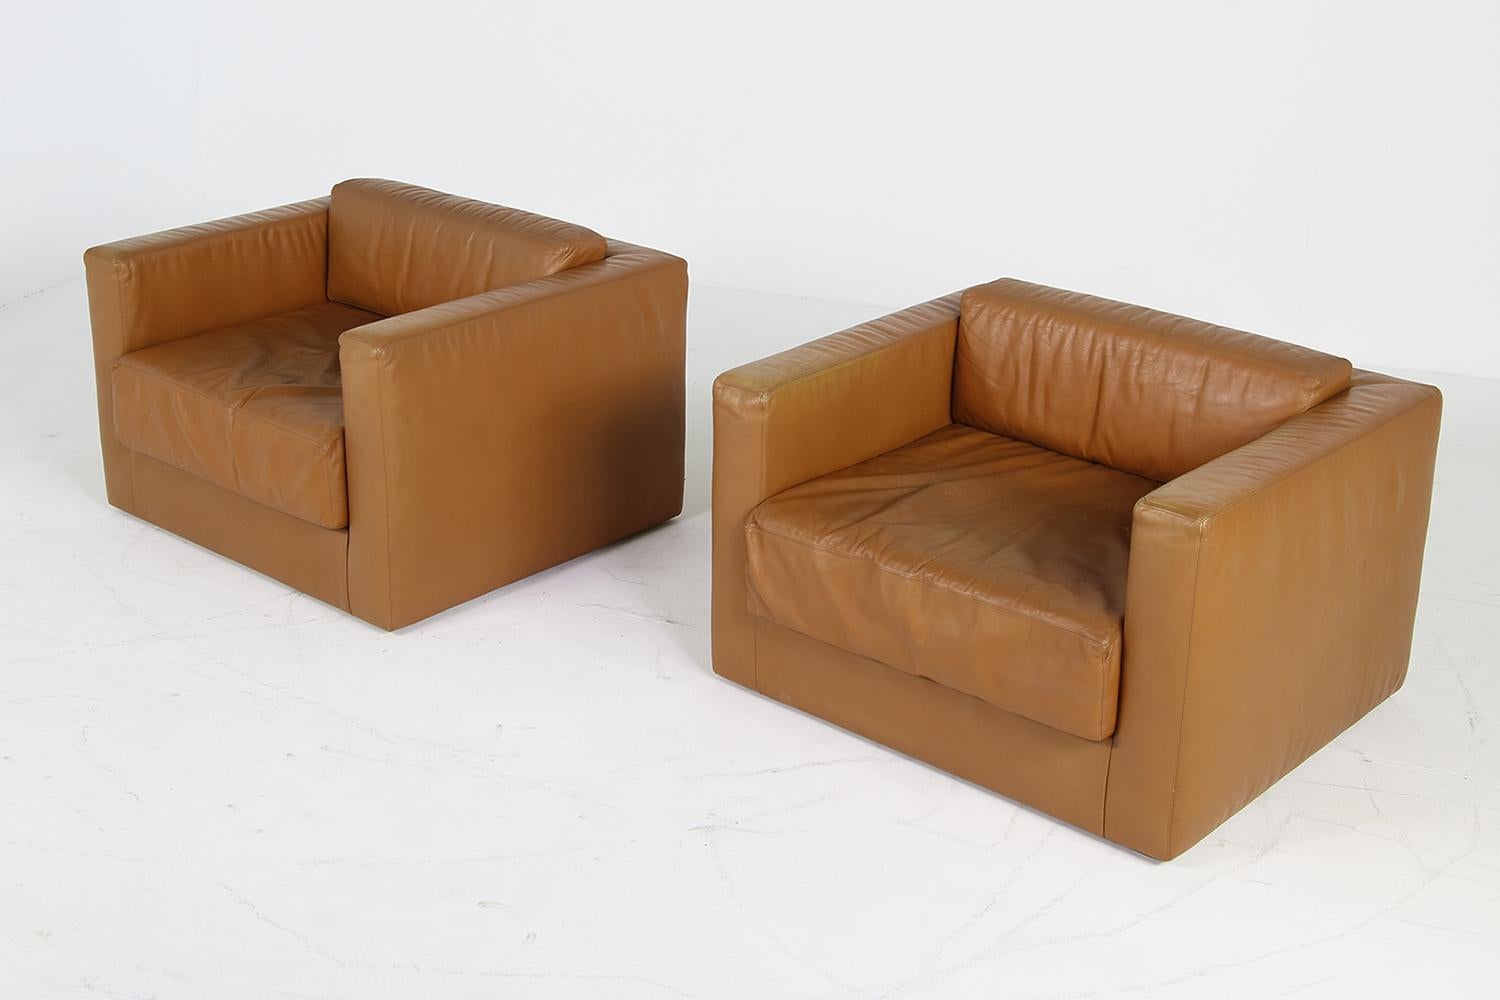 Unique & Large 1960s Landscape Sofa & Chairs Brown Leather Made to Order 1969 For Sale 10